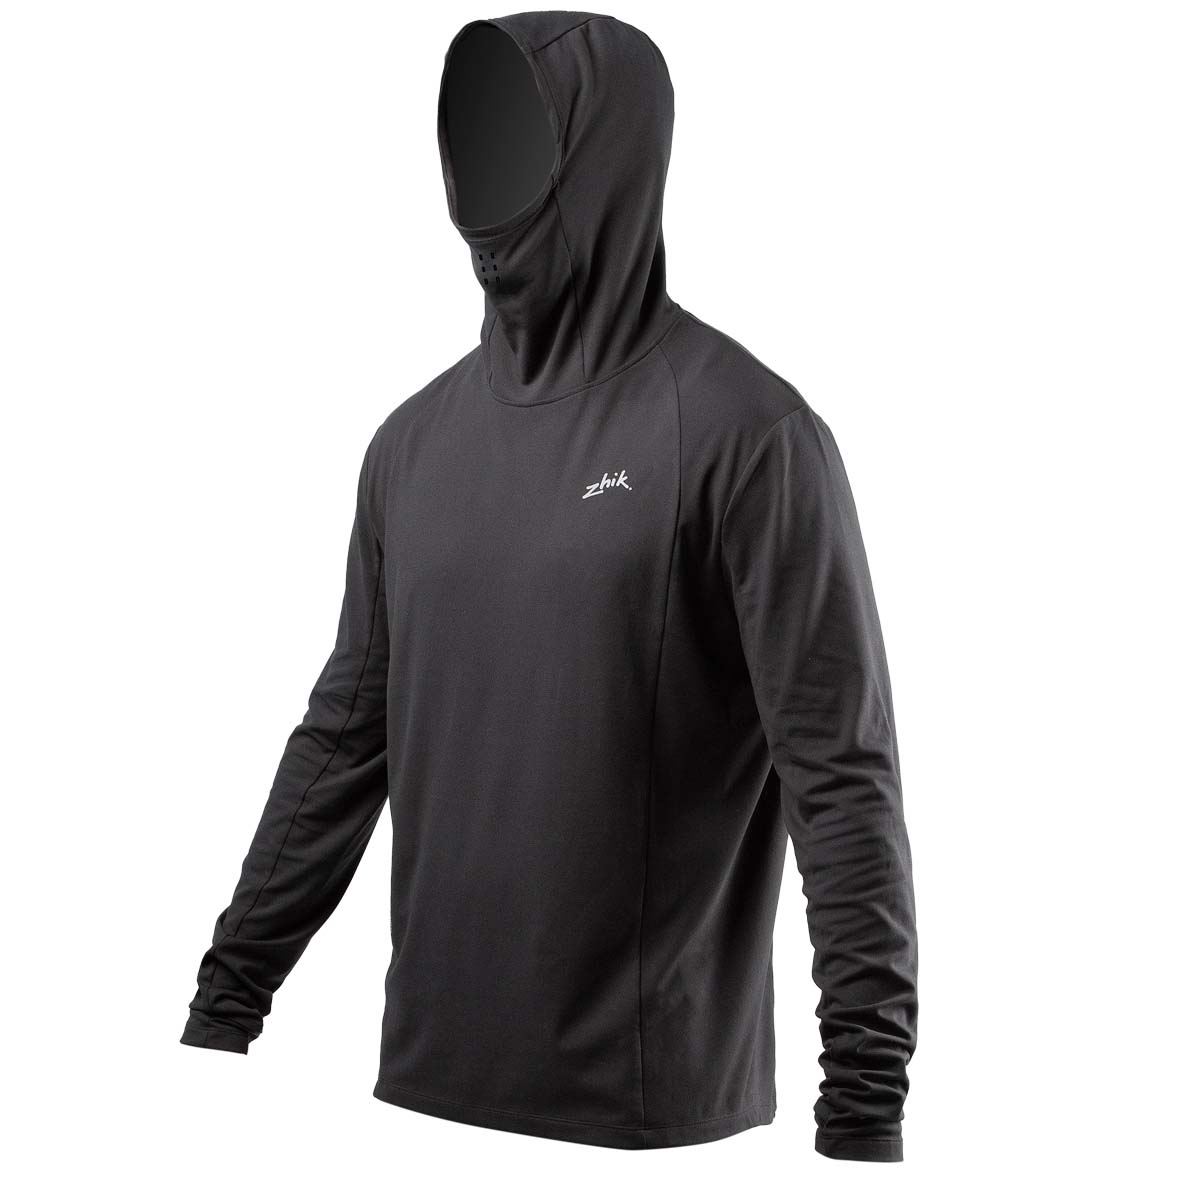 ZhikMotion Long Sleeve Hooded Top Mens